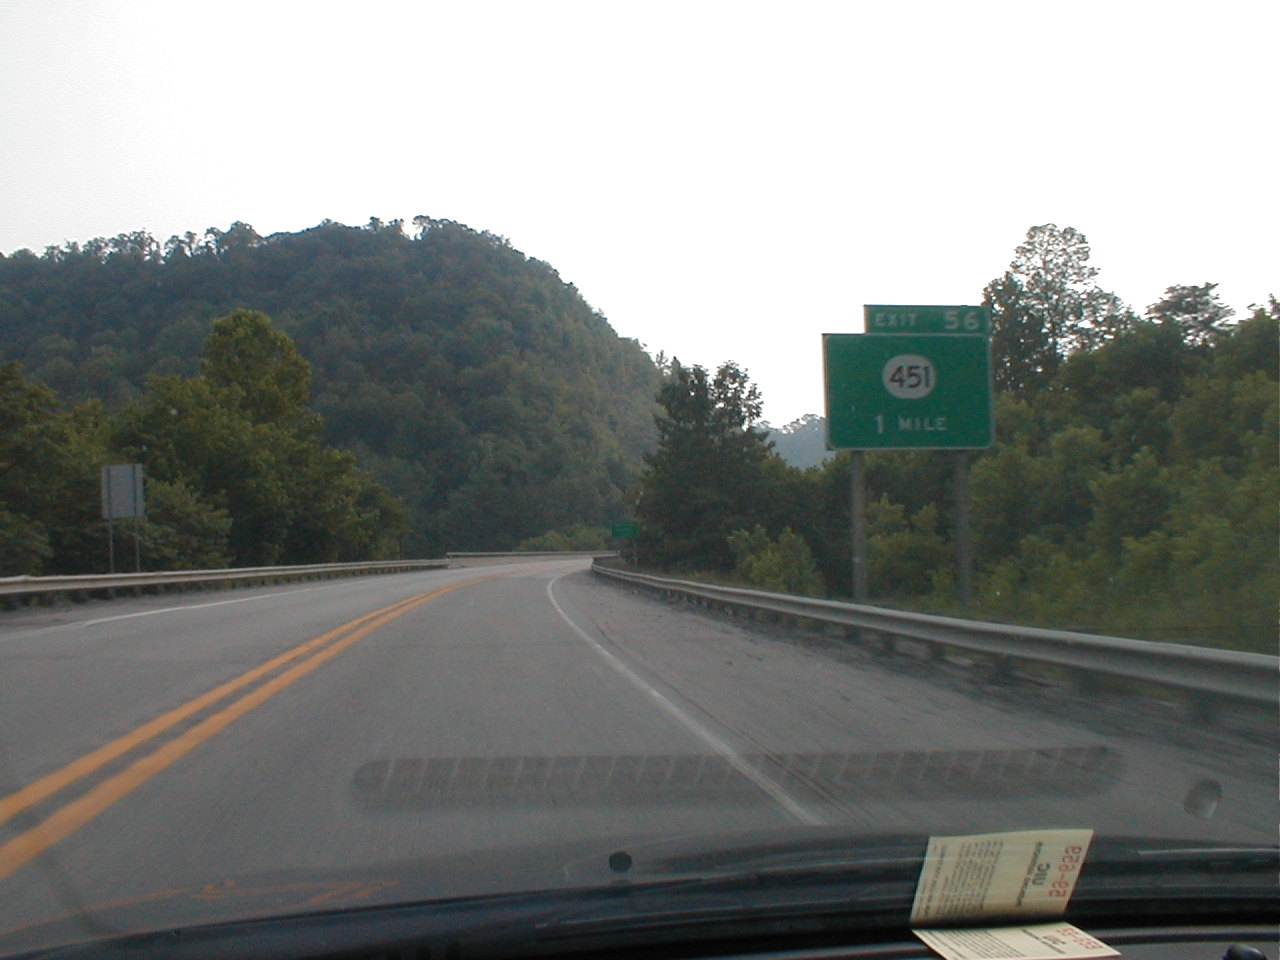 Heading westbound at exit 56.